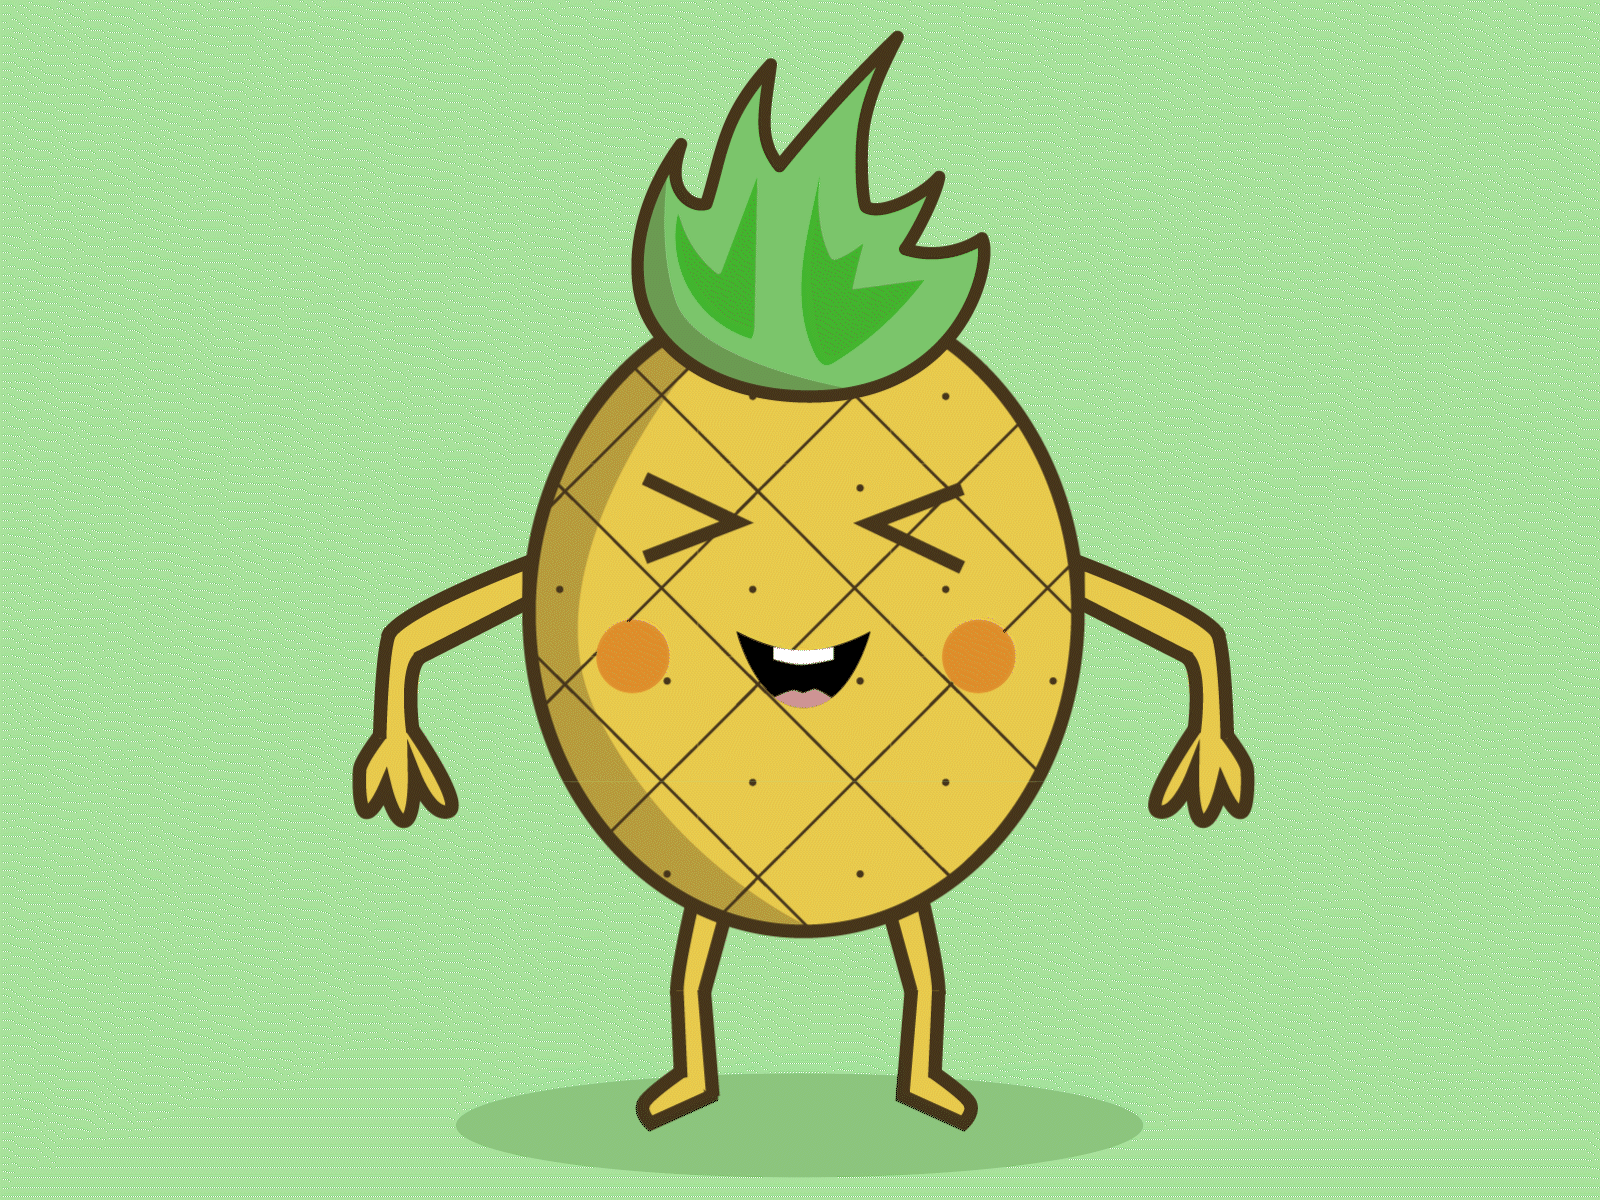 Dancing Pineapple animating animation character character rigging dancing duik fruit fruit character illustration pineapple pineapple character simple rigging